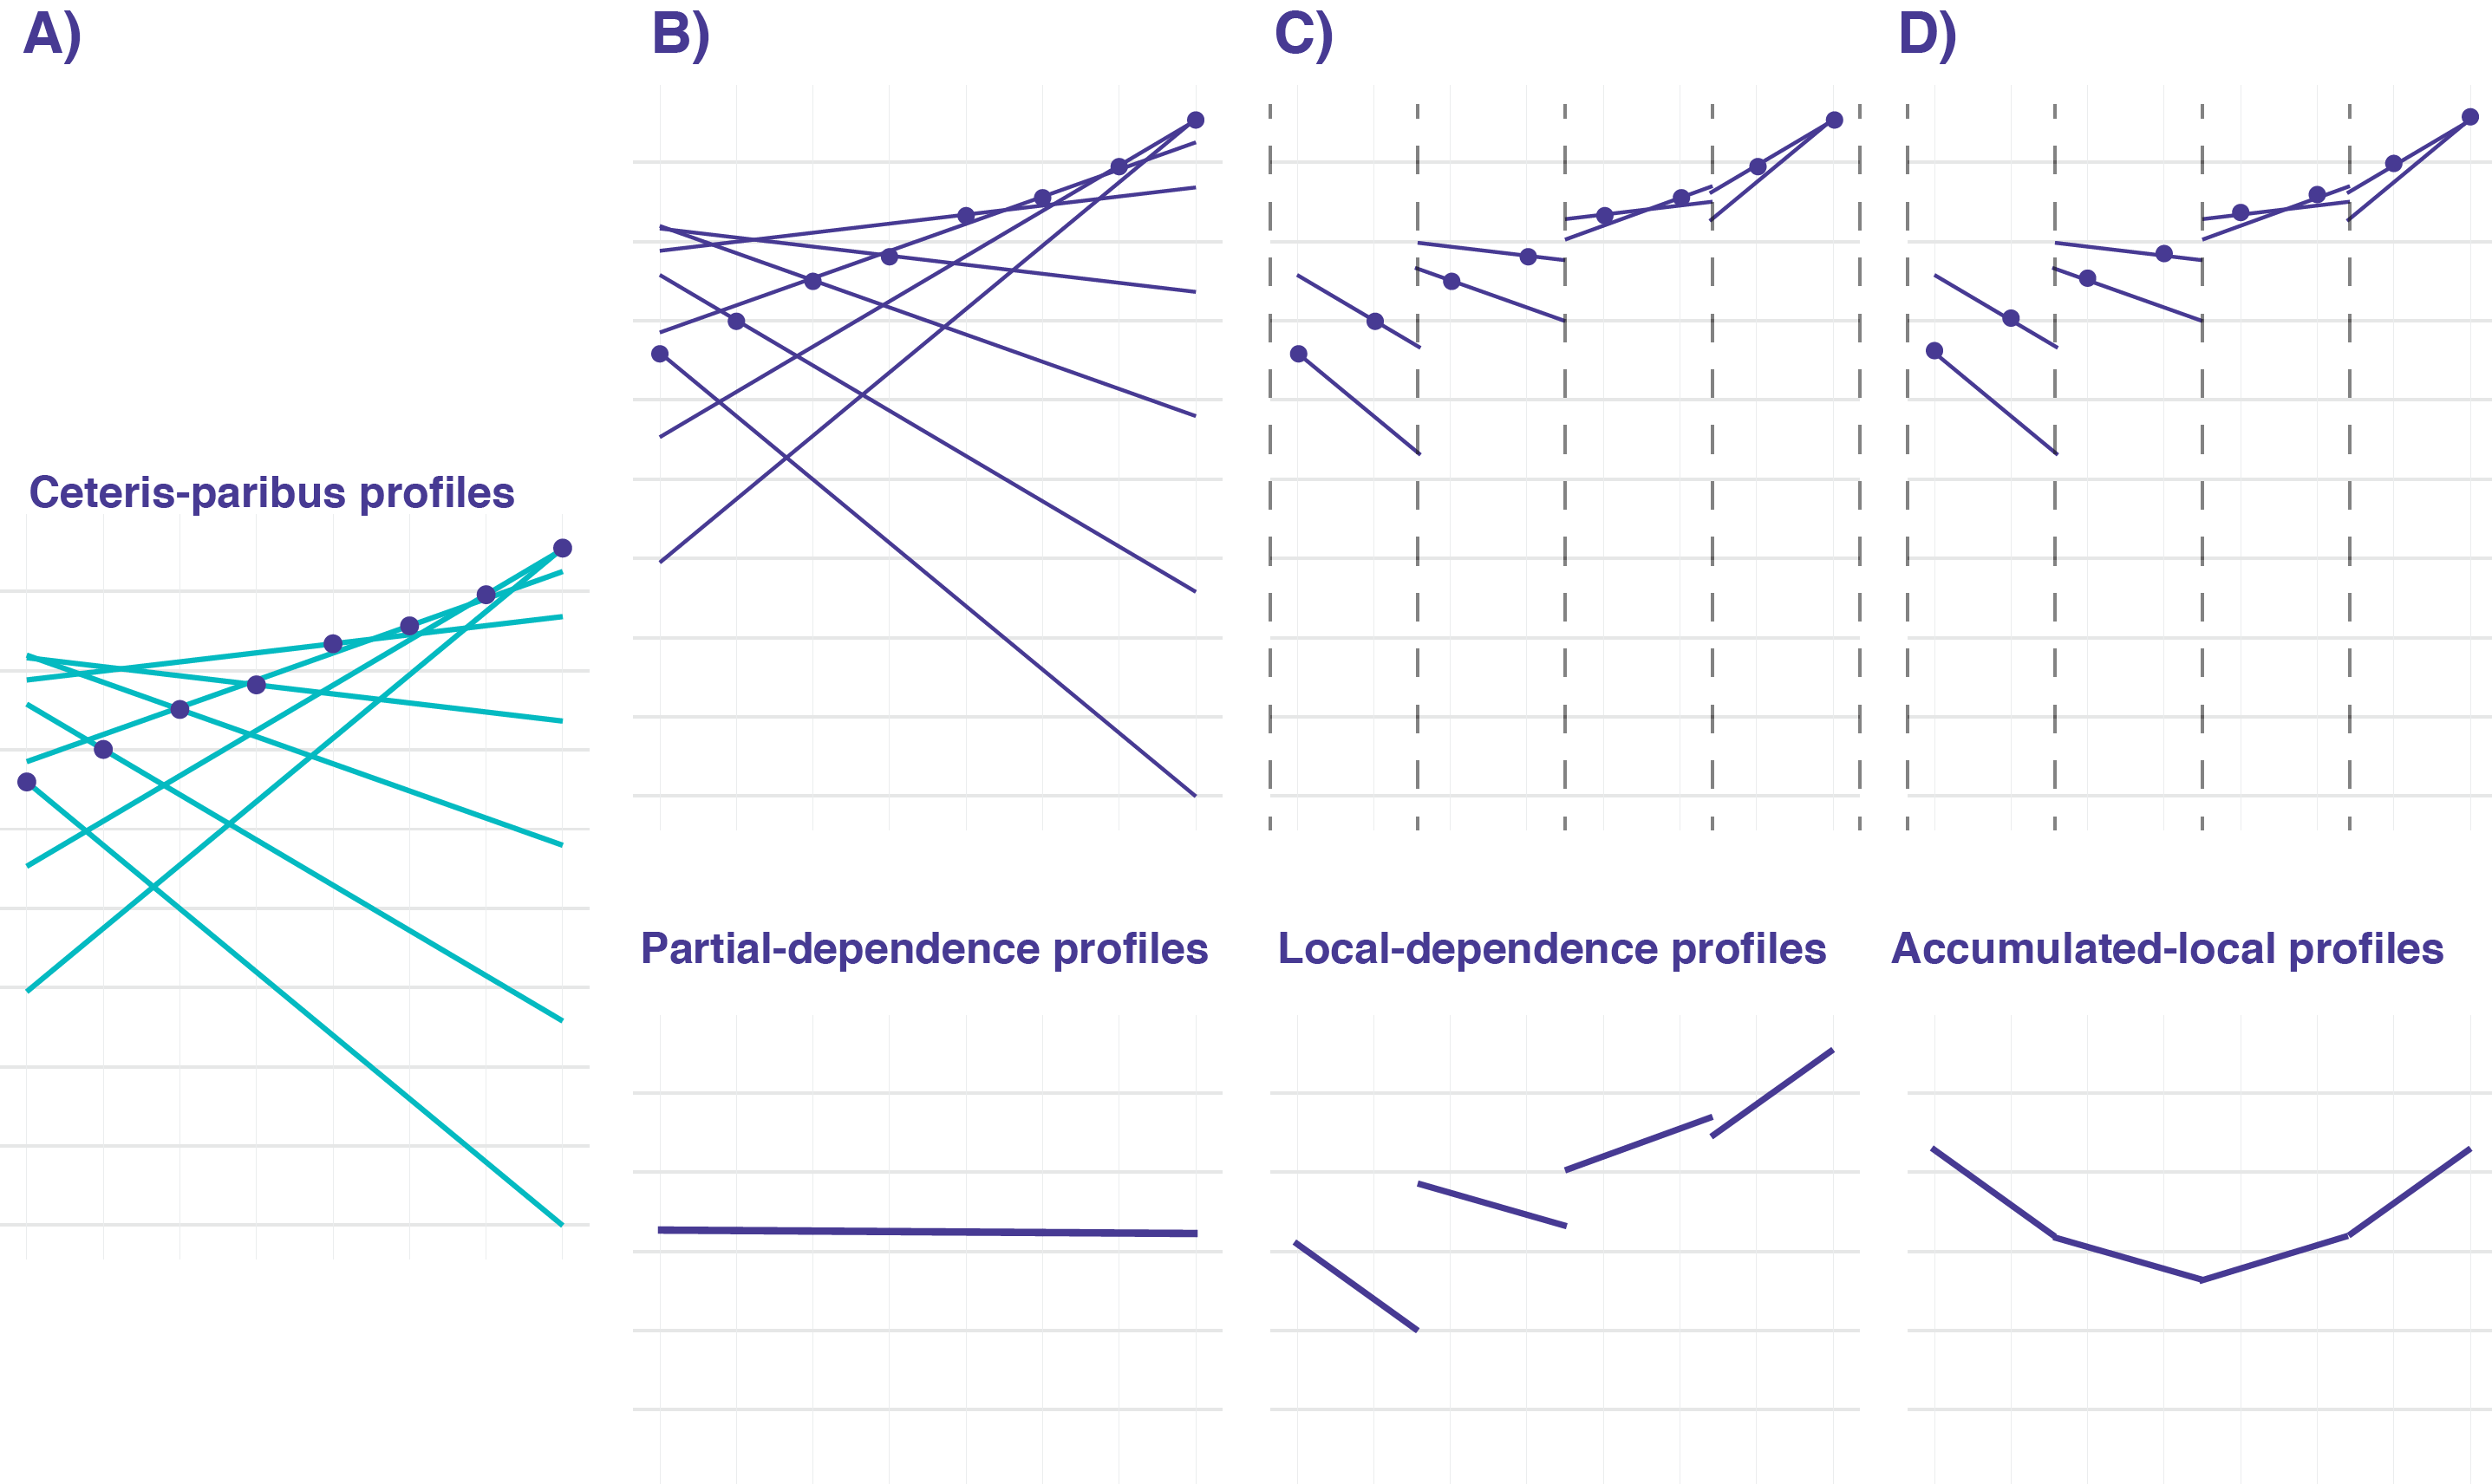 Partial-dependence (PD), local-dependence (LD), and accumulated-local (AL) profiles for model (18.10). Panel A: ceteris-paribus (CP) profiles for eight observations from Table 18.4. Panel B: entire CP profiles (top) contribute to calculation of the corresponding PD profile (bottom). Panel C: only parts of the CP profiles (top), close to observations of interest, contribute to the calculation of the corresponding LD profile (bottom). Panel D: only parts of the CP profiles (top) contribute to the calculation of the corresponding AL profile (bottom).